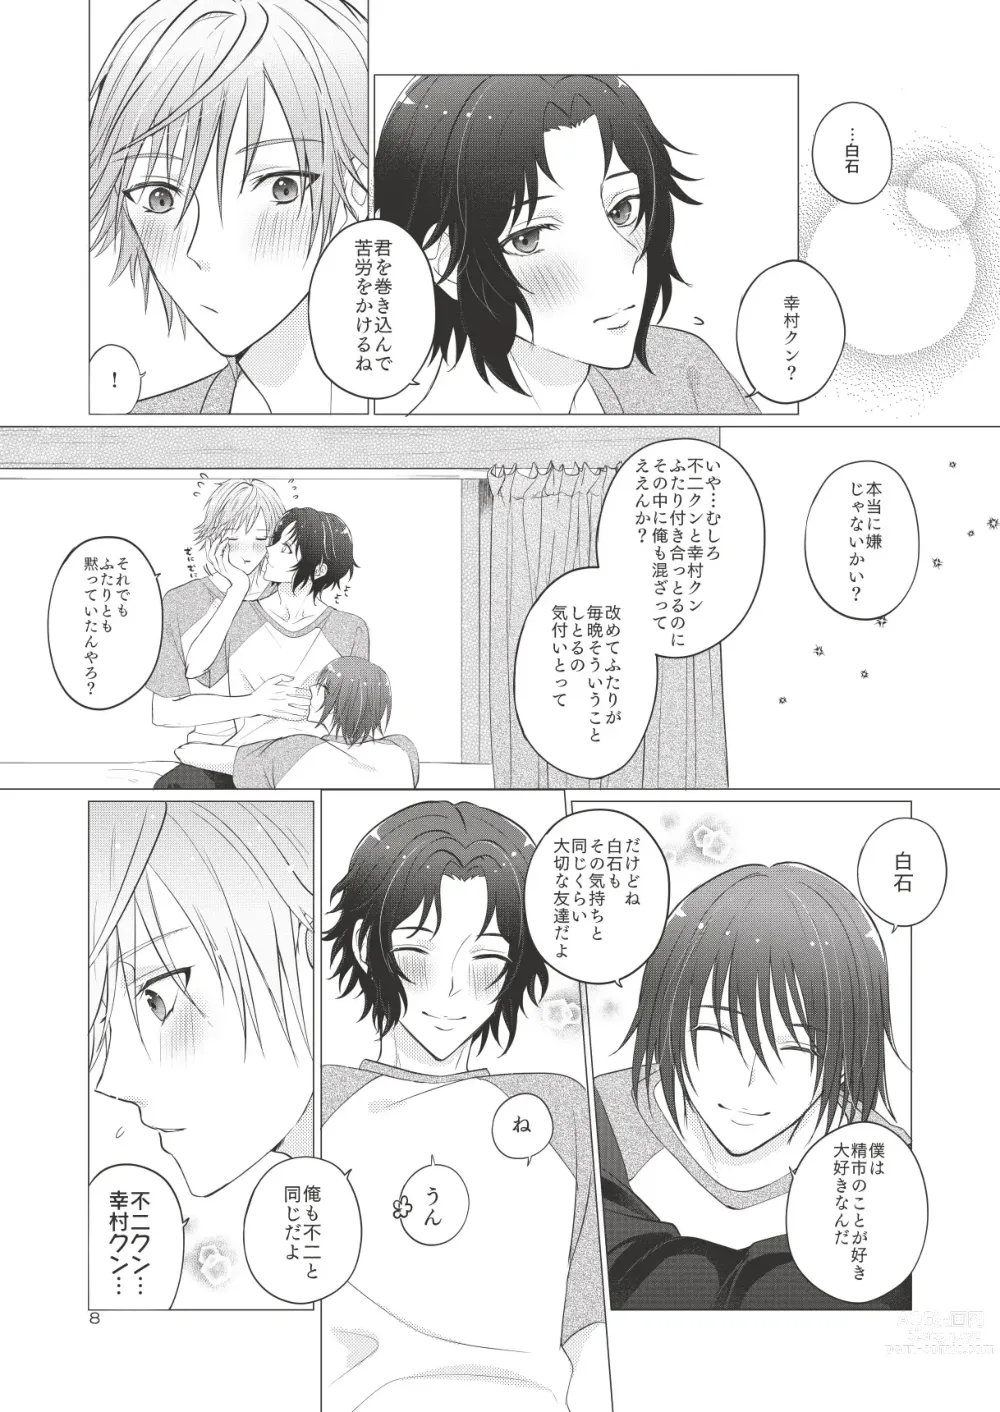 Page 7 of doujinshi Bonds of affection